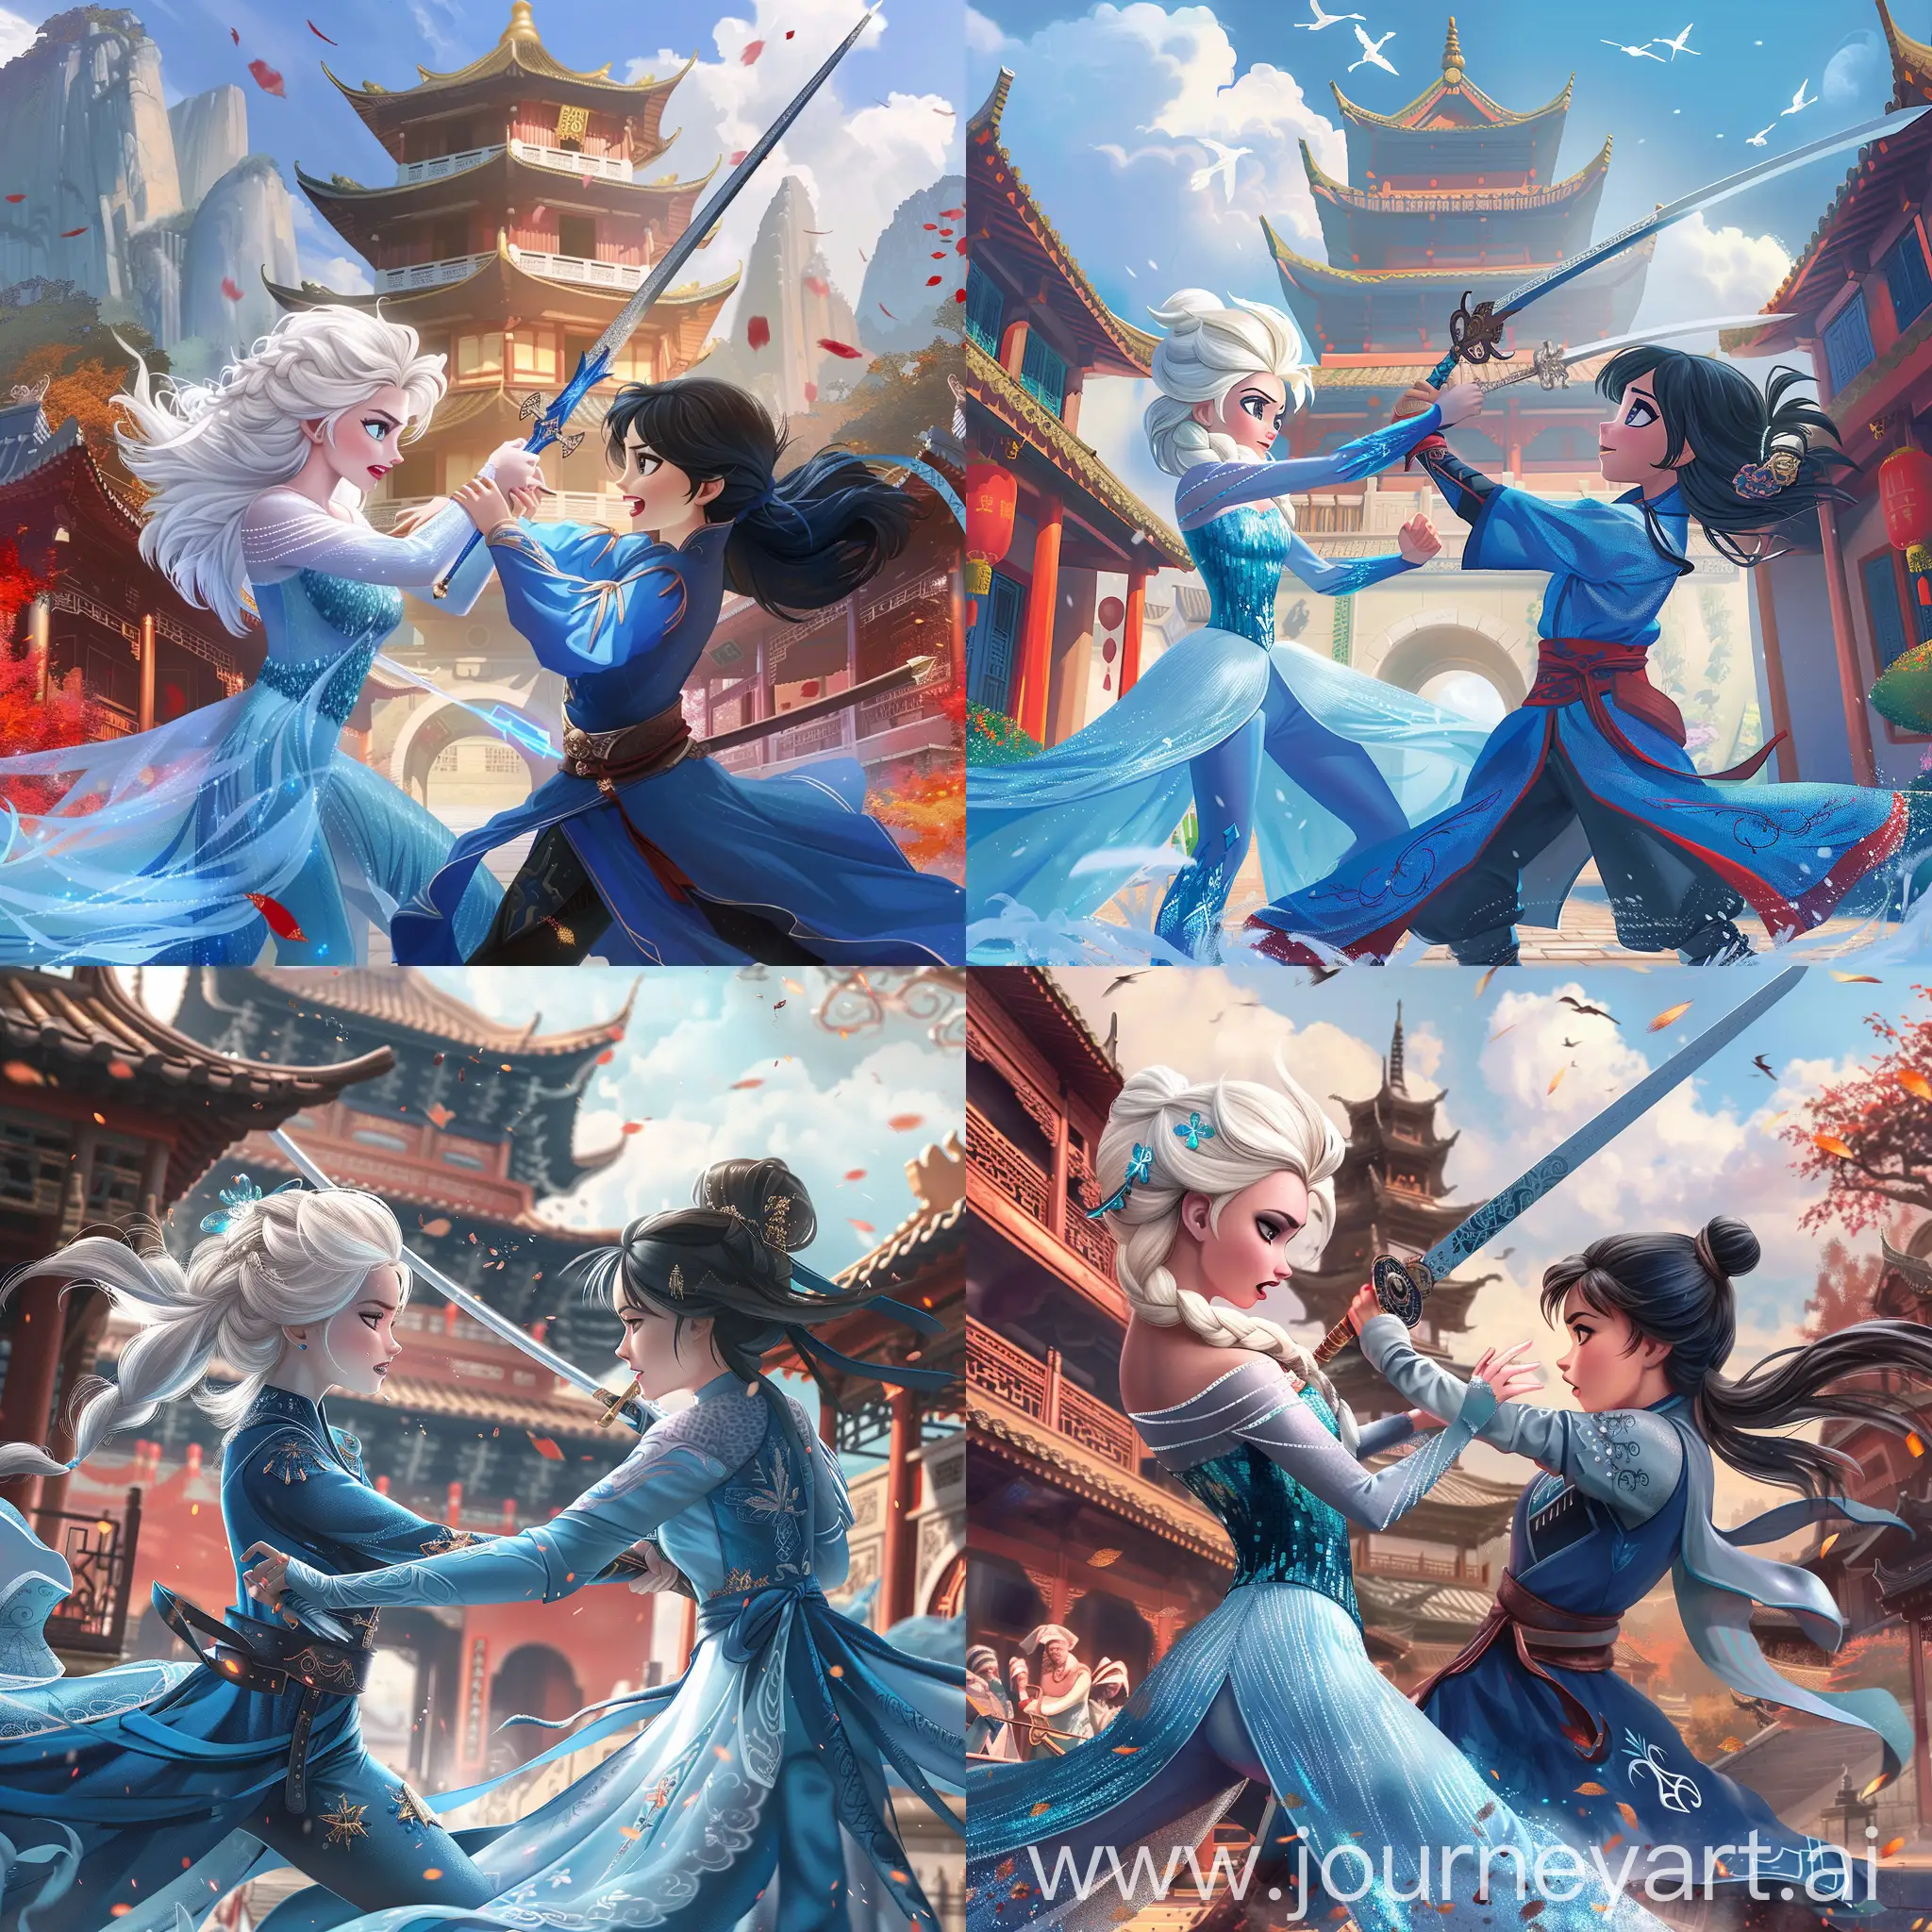 Medieval-Chinese-Princess-Duel-Elsa-vs-Snow-White-with-Swords